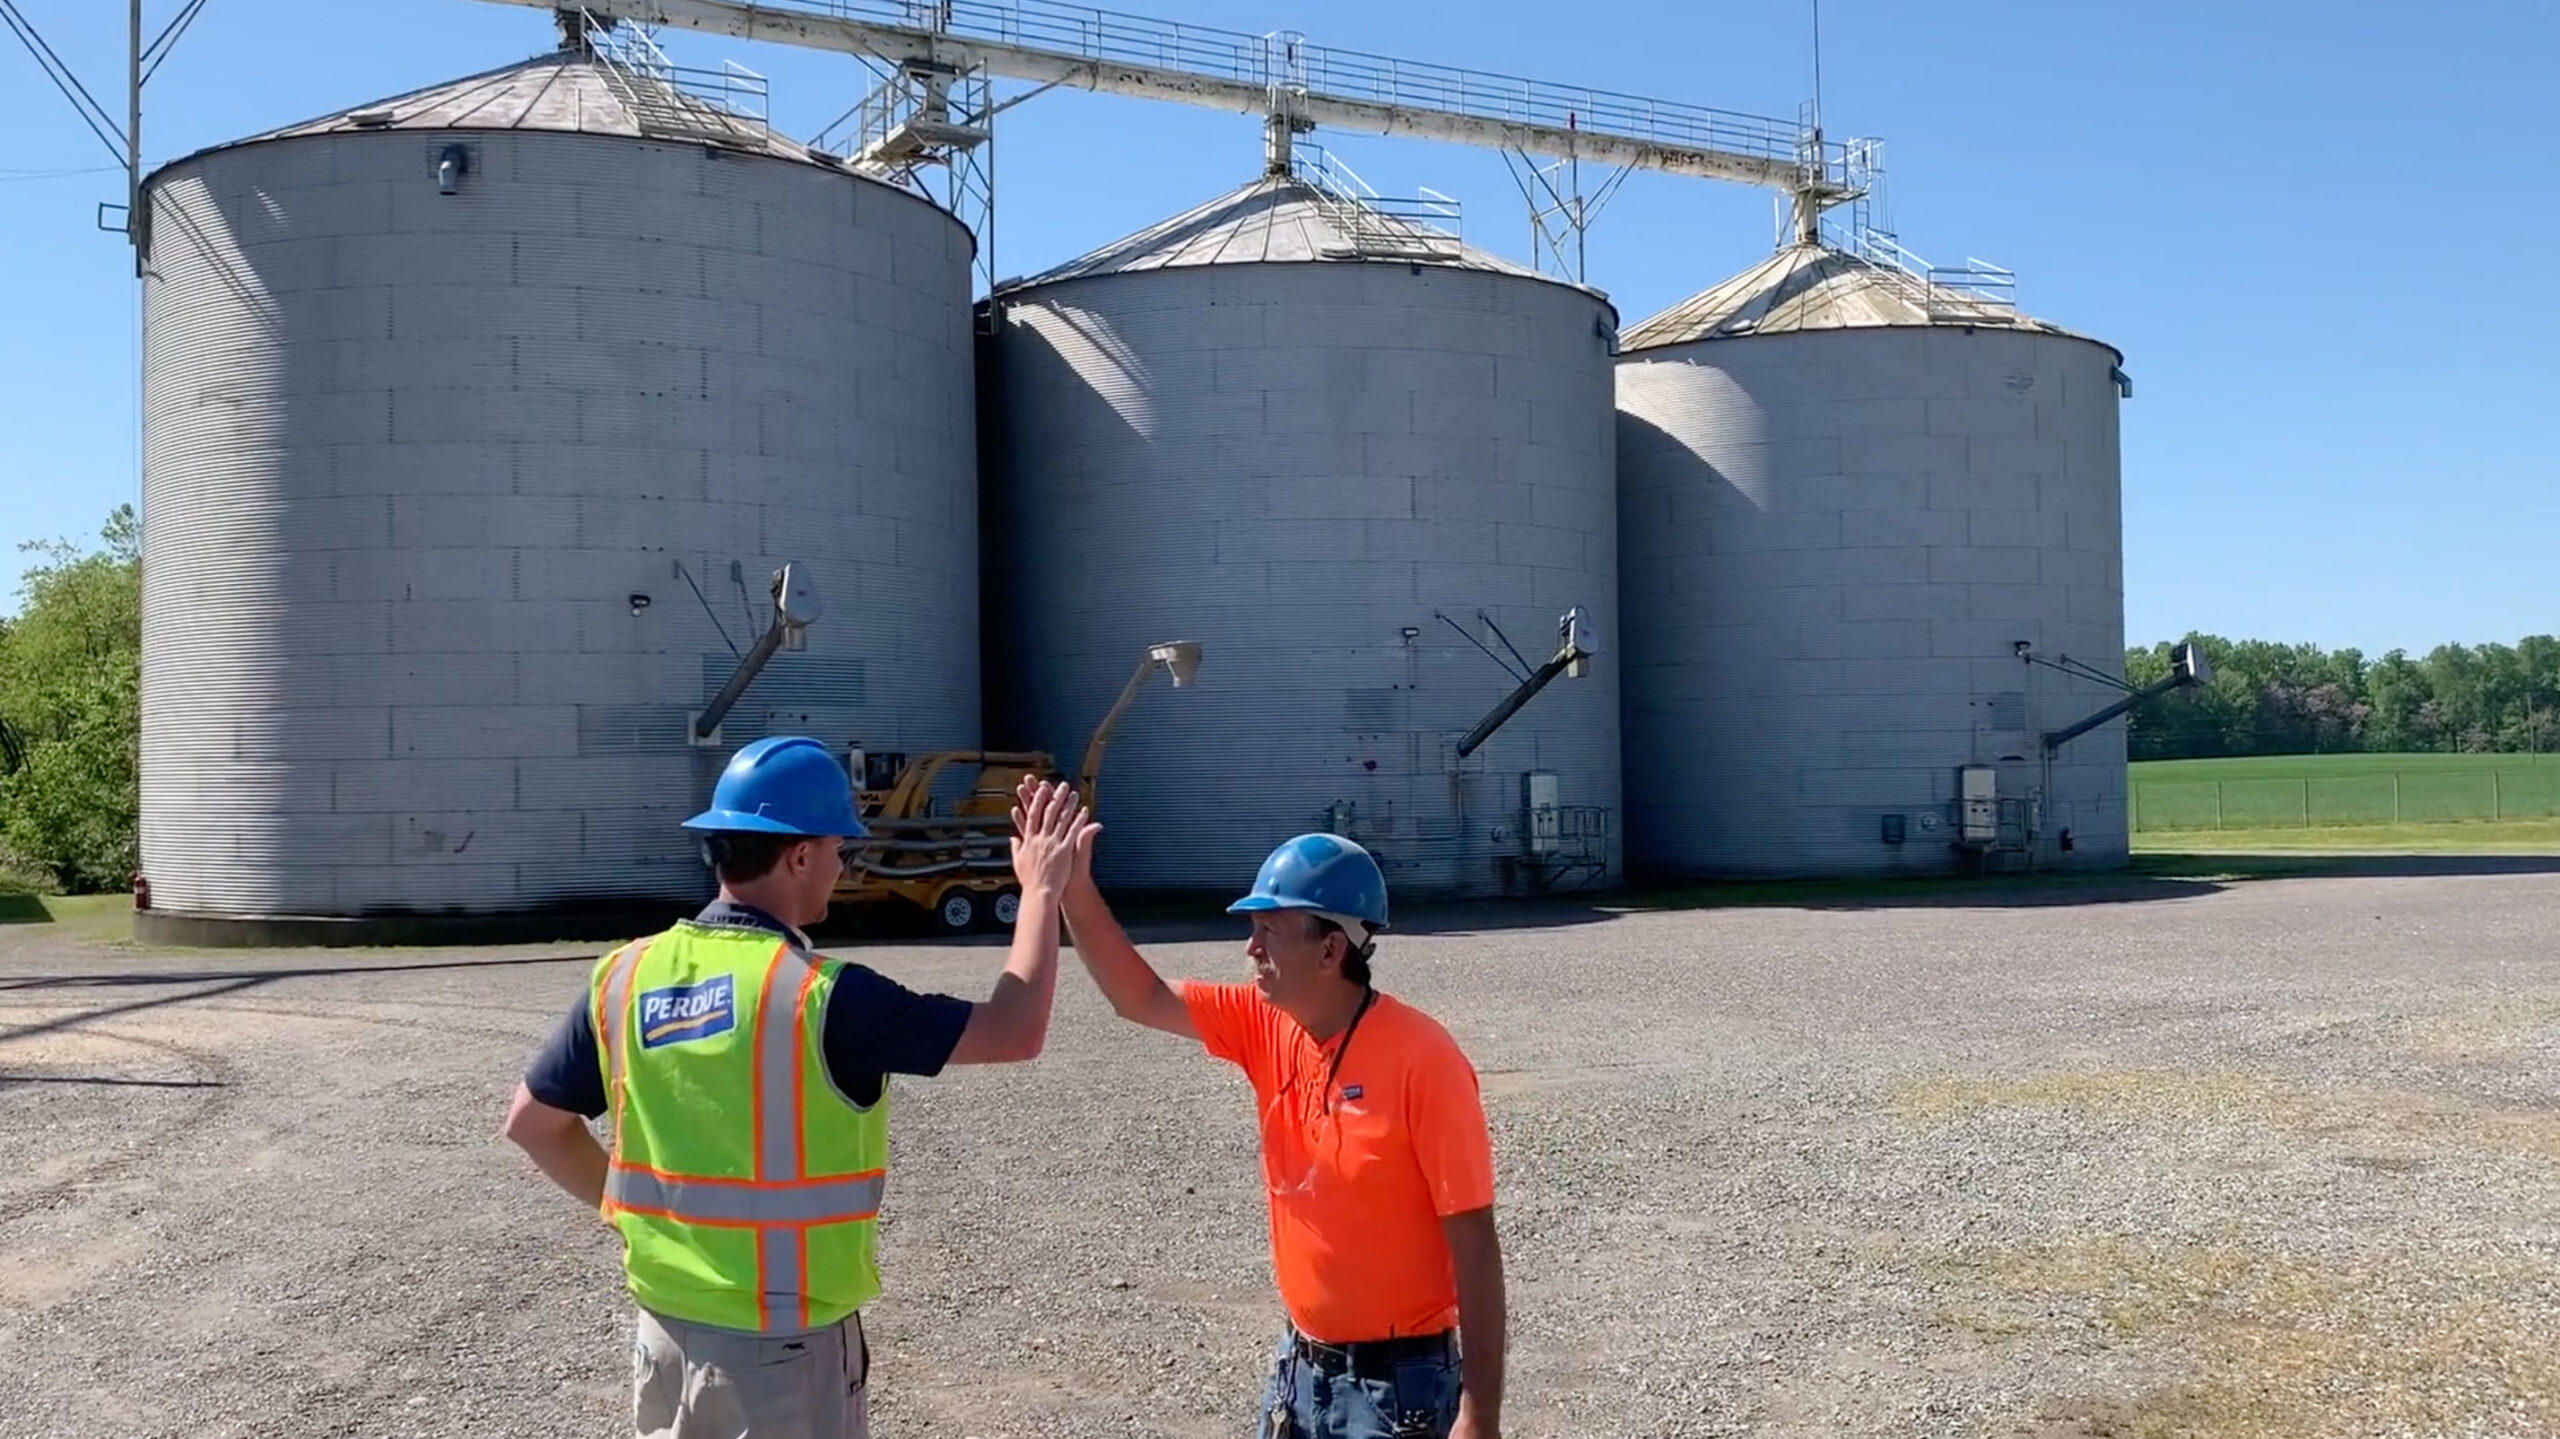 Man in yellow reflective Perdue vest and man in orange t-shirt with blue helmets high fiving in front of 3 industrial silos.